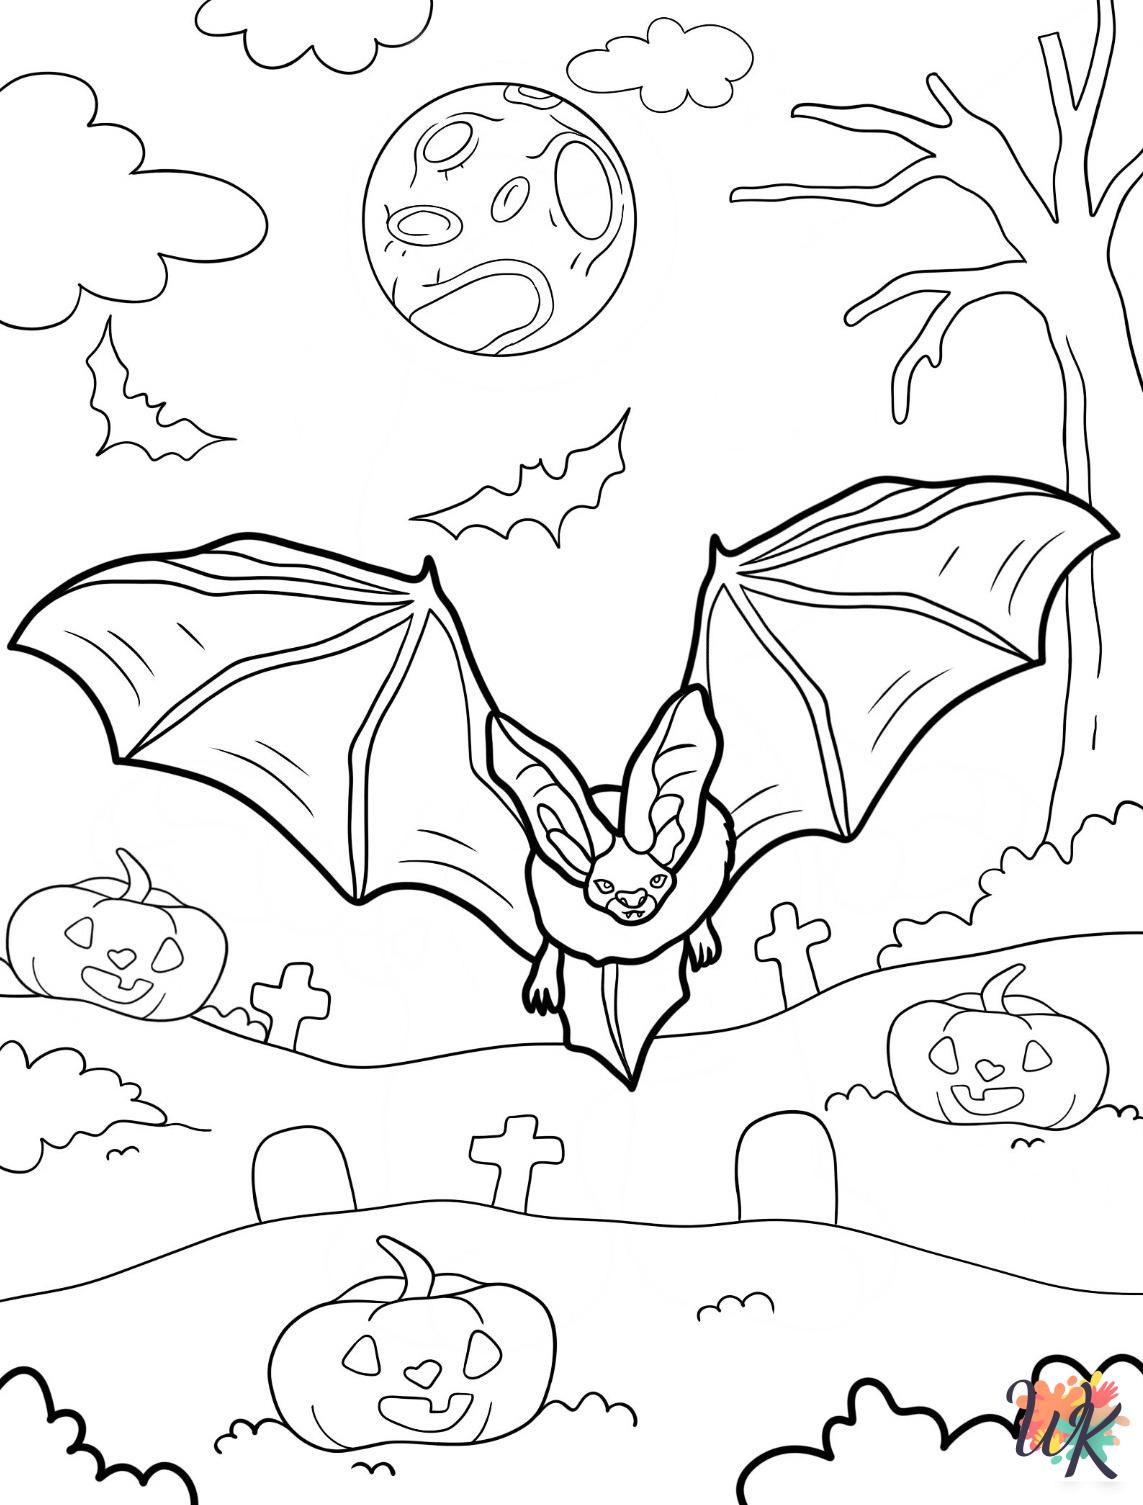 easy Bat coloring pages